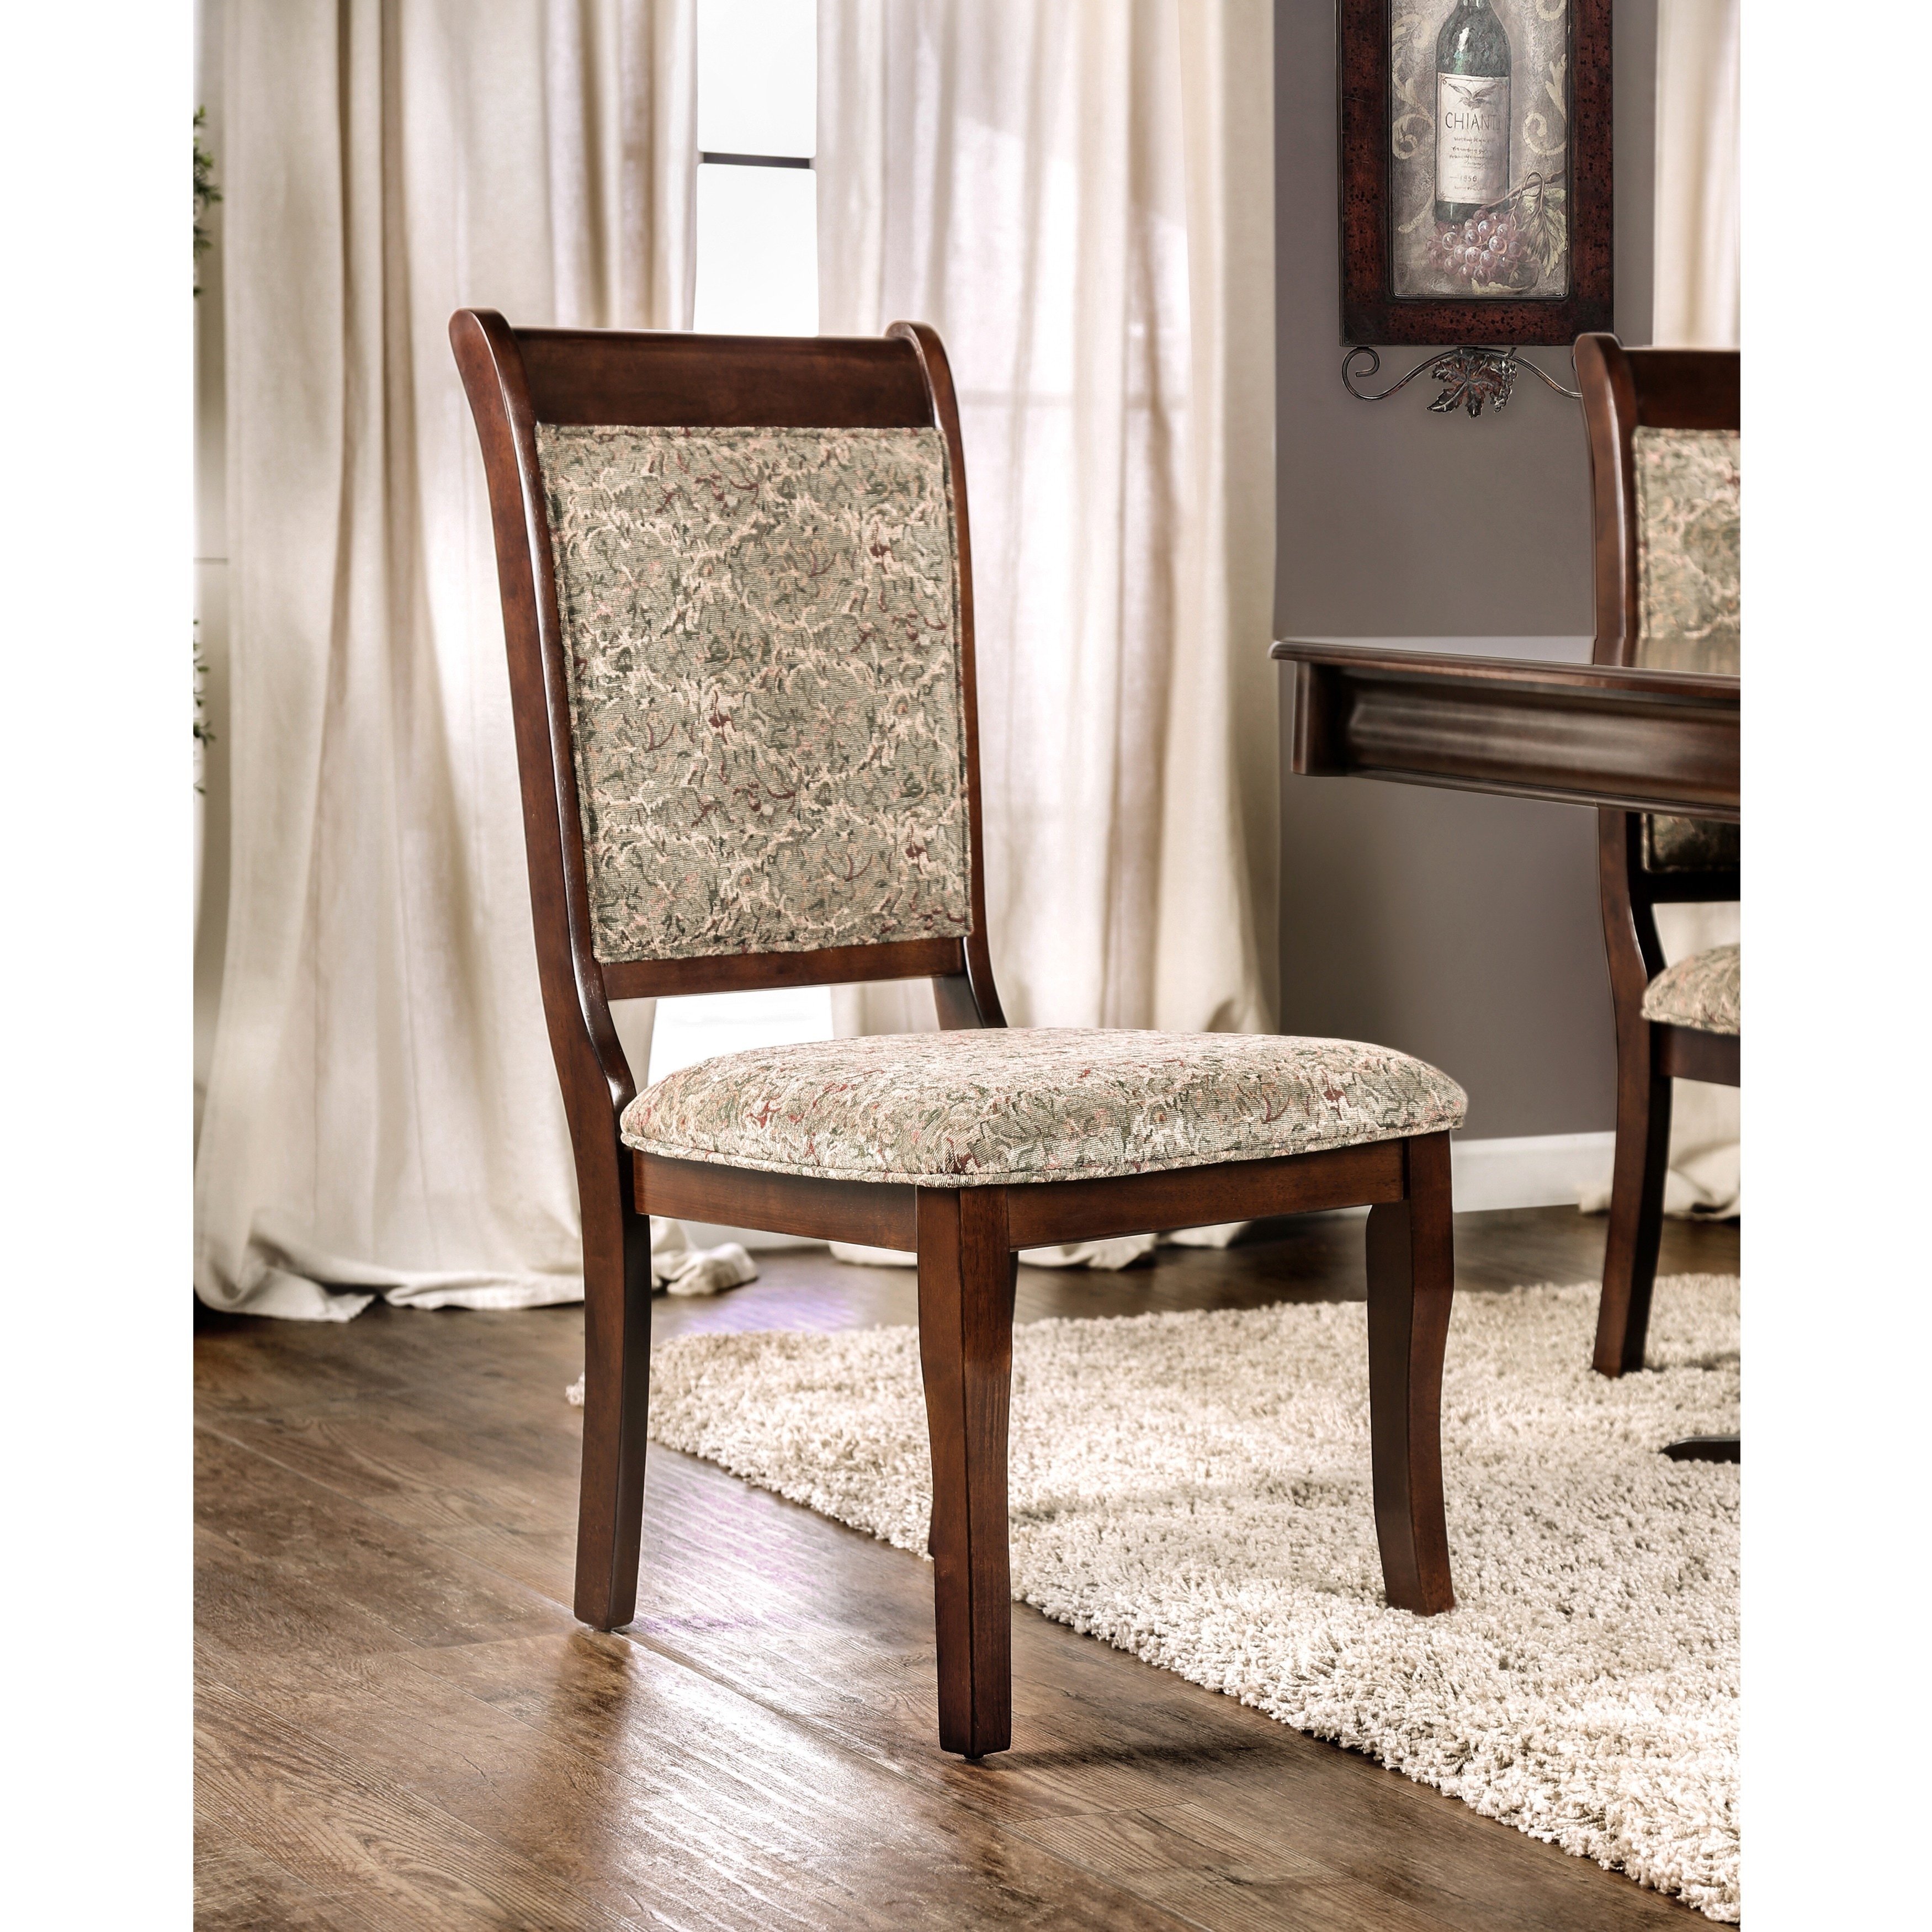 Furniture Of America Ravena Antique Cherry Printed Dining Chair (set Of 2)